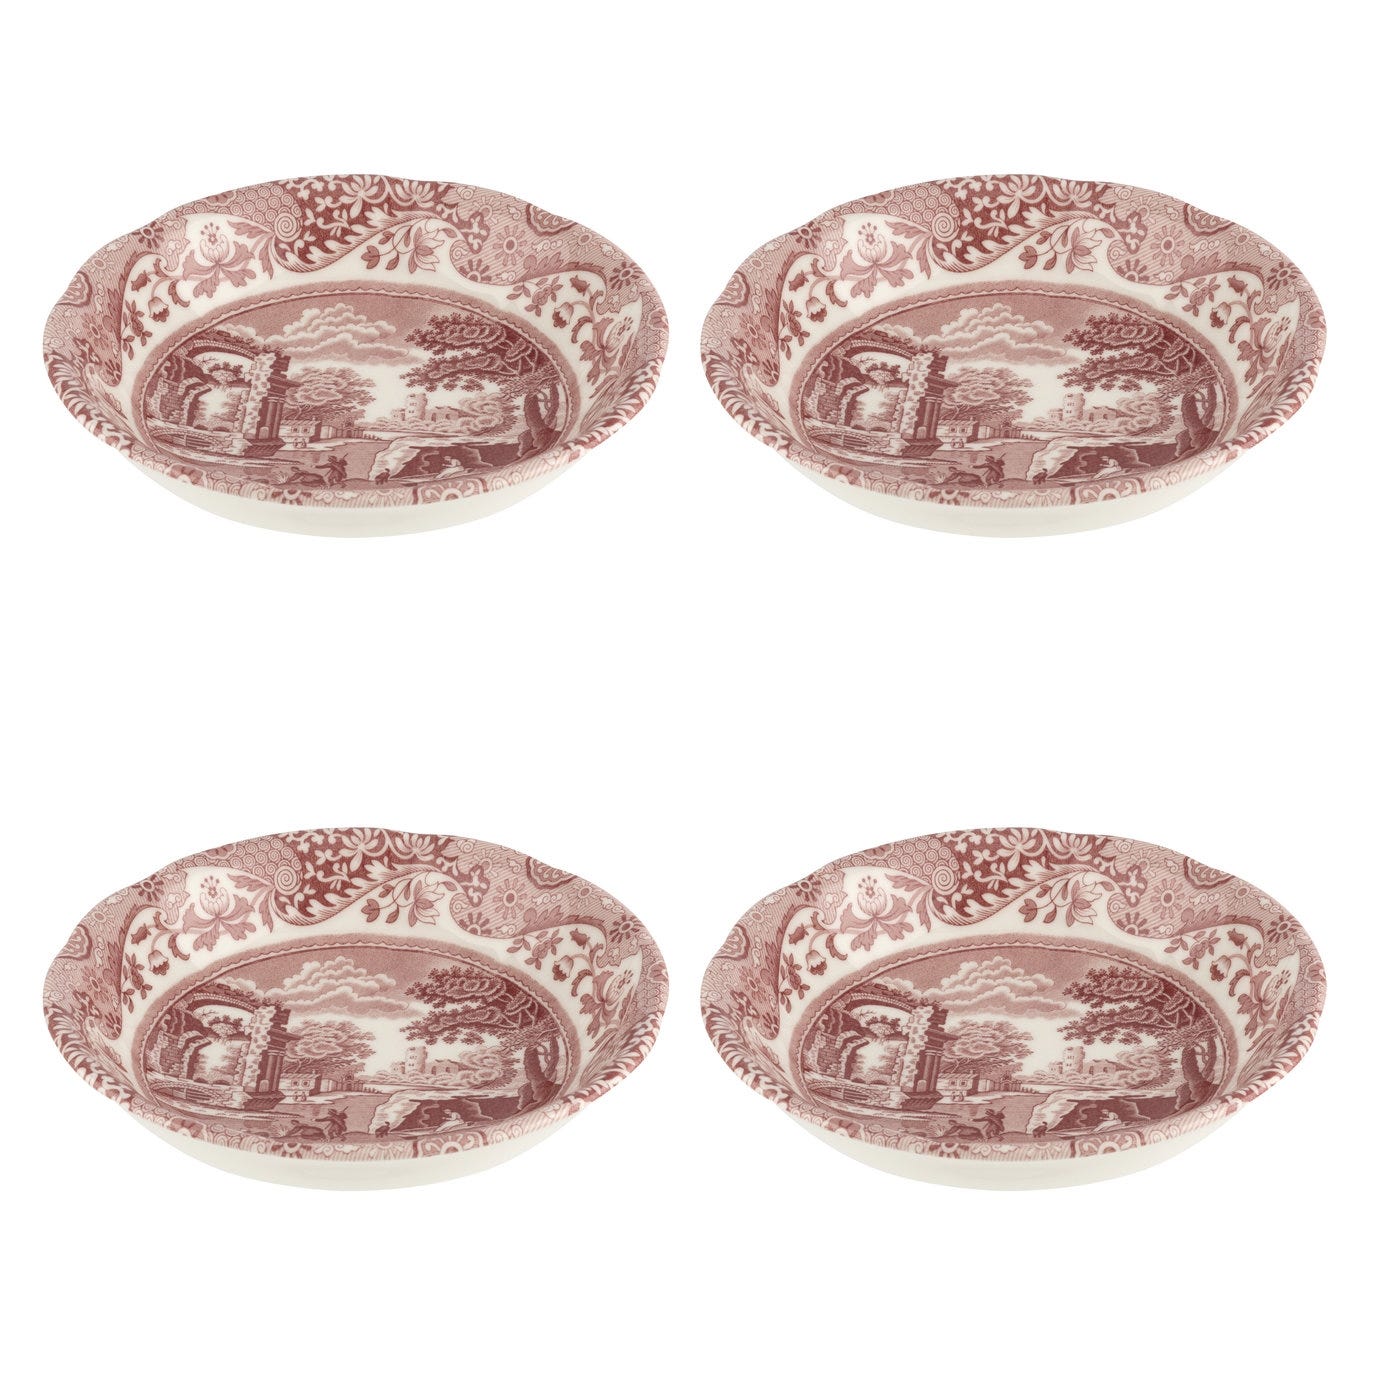 Spode Cranberry Italian 6 Inch Cereal Bowl Set of 4